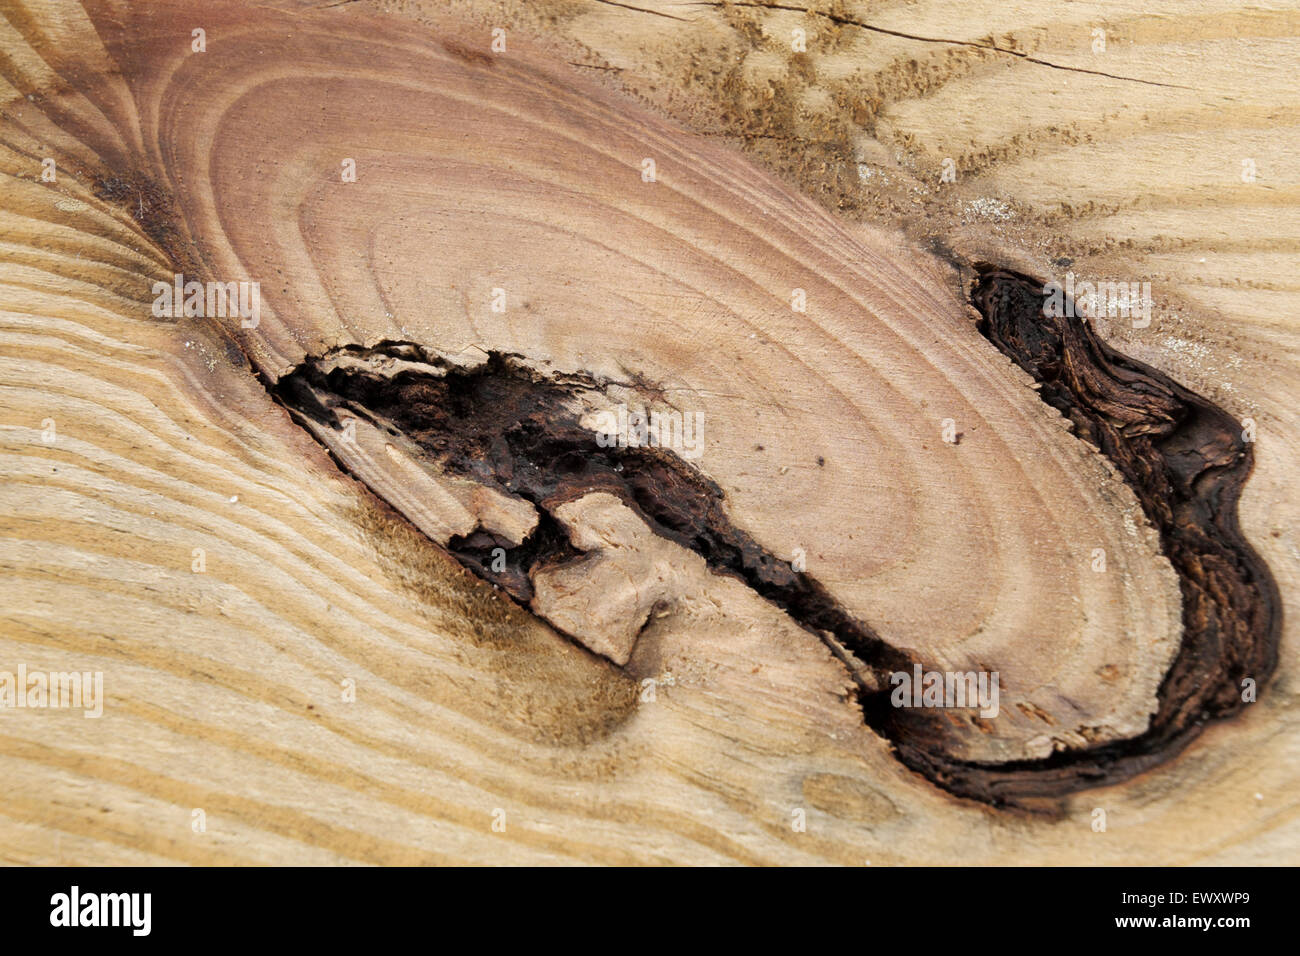 Knot in a construction grade Pine board. Stock Photo